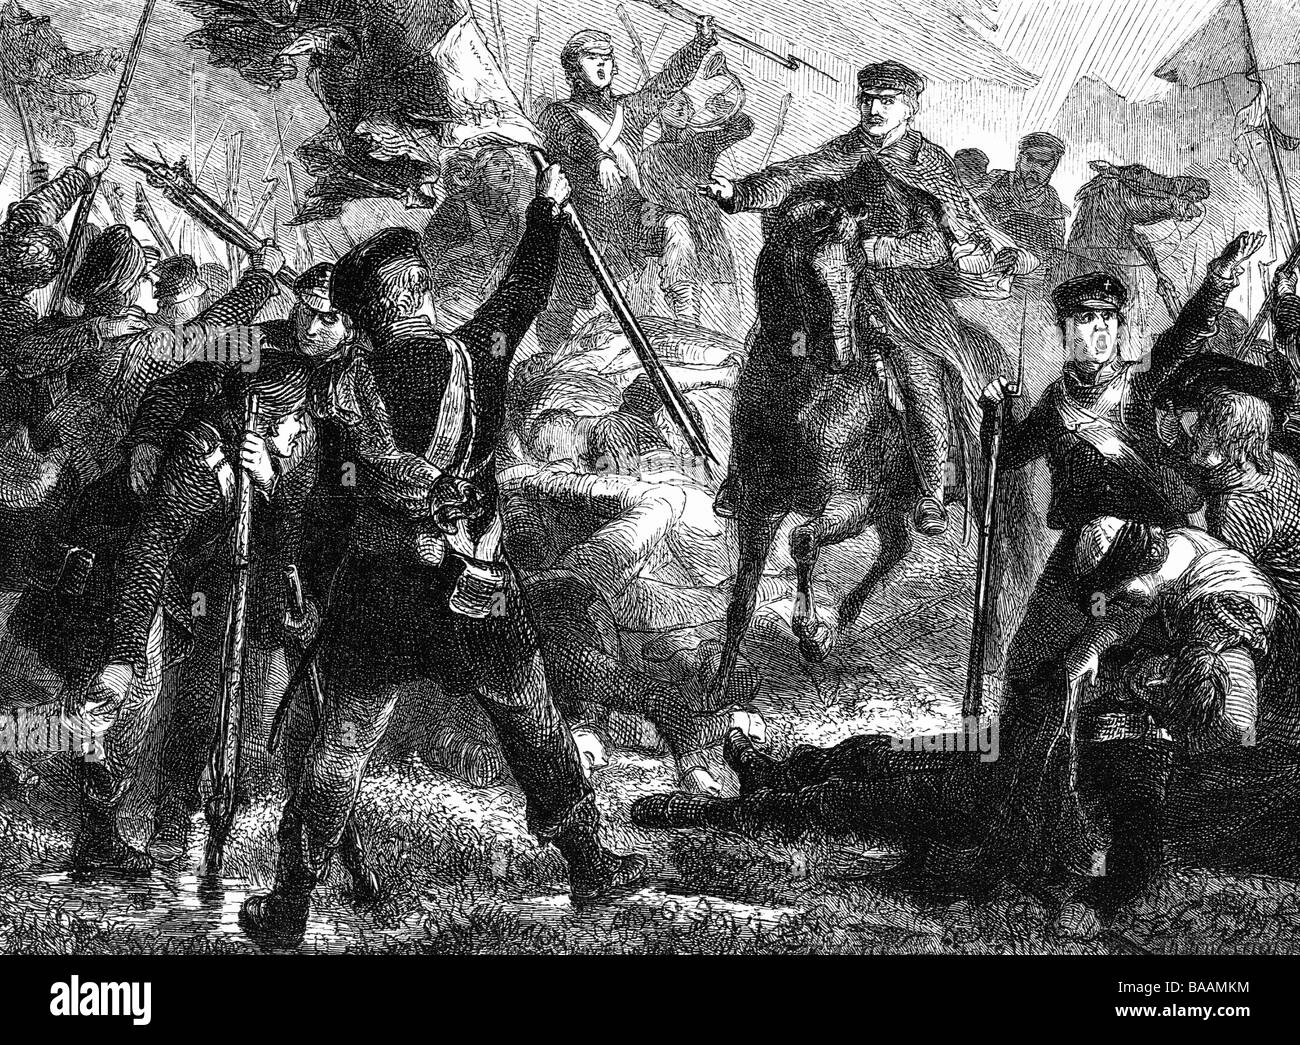 events, War of the Sixth Coalition 1812 - 1814, Battle of Hagelberg, 27.8.1813, Prussian Landwehr after the battle, wood engraving after painting by Emil Huenten (1827 - 1902), Napoleonic Wars, Germany, Saxony, Prussia, infantry, militia, cheering, victory, 19th century, historic, historical, people, Stock Photo